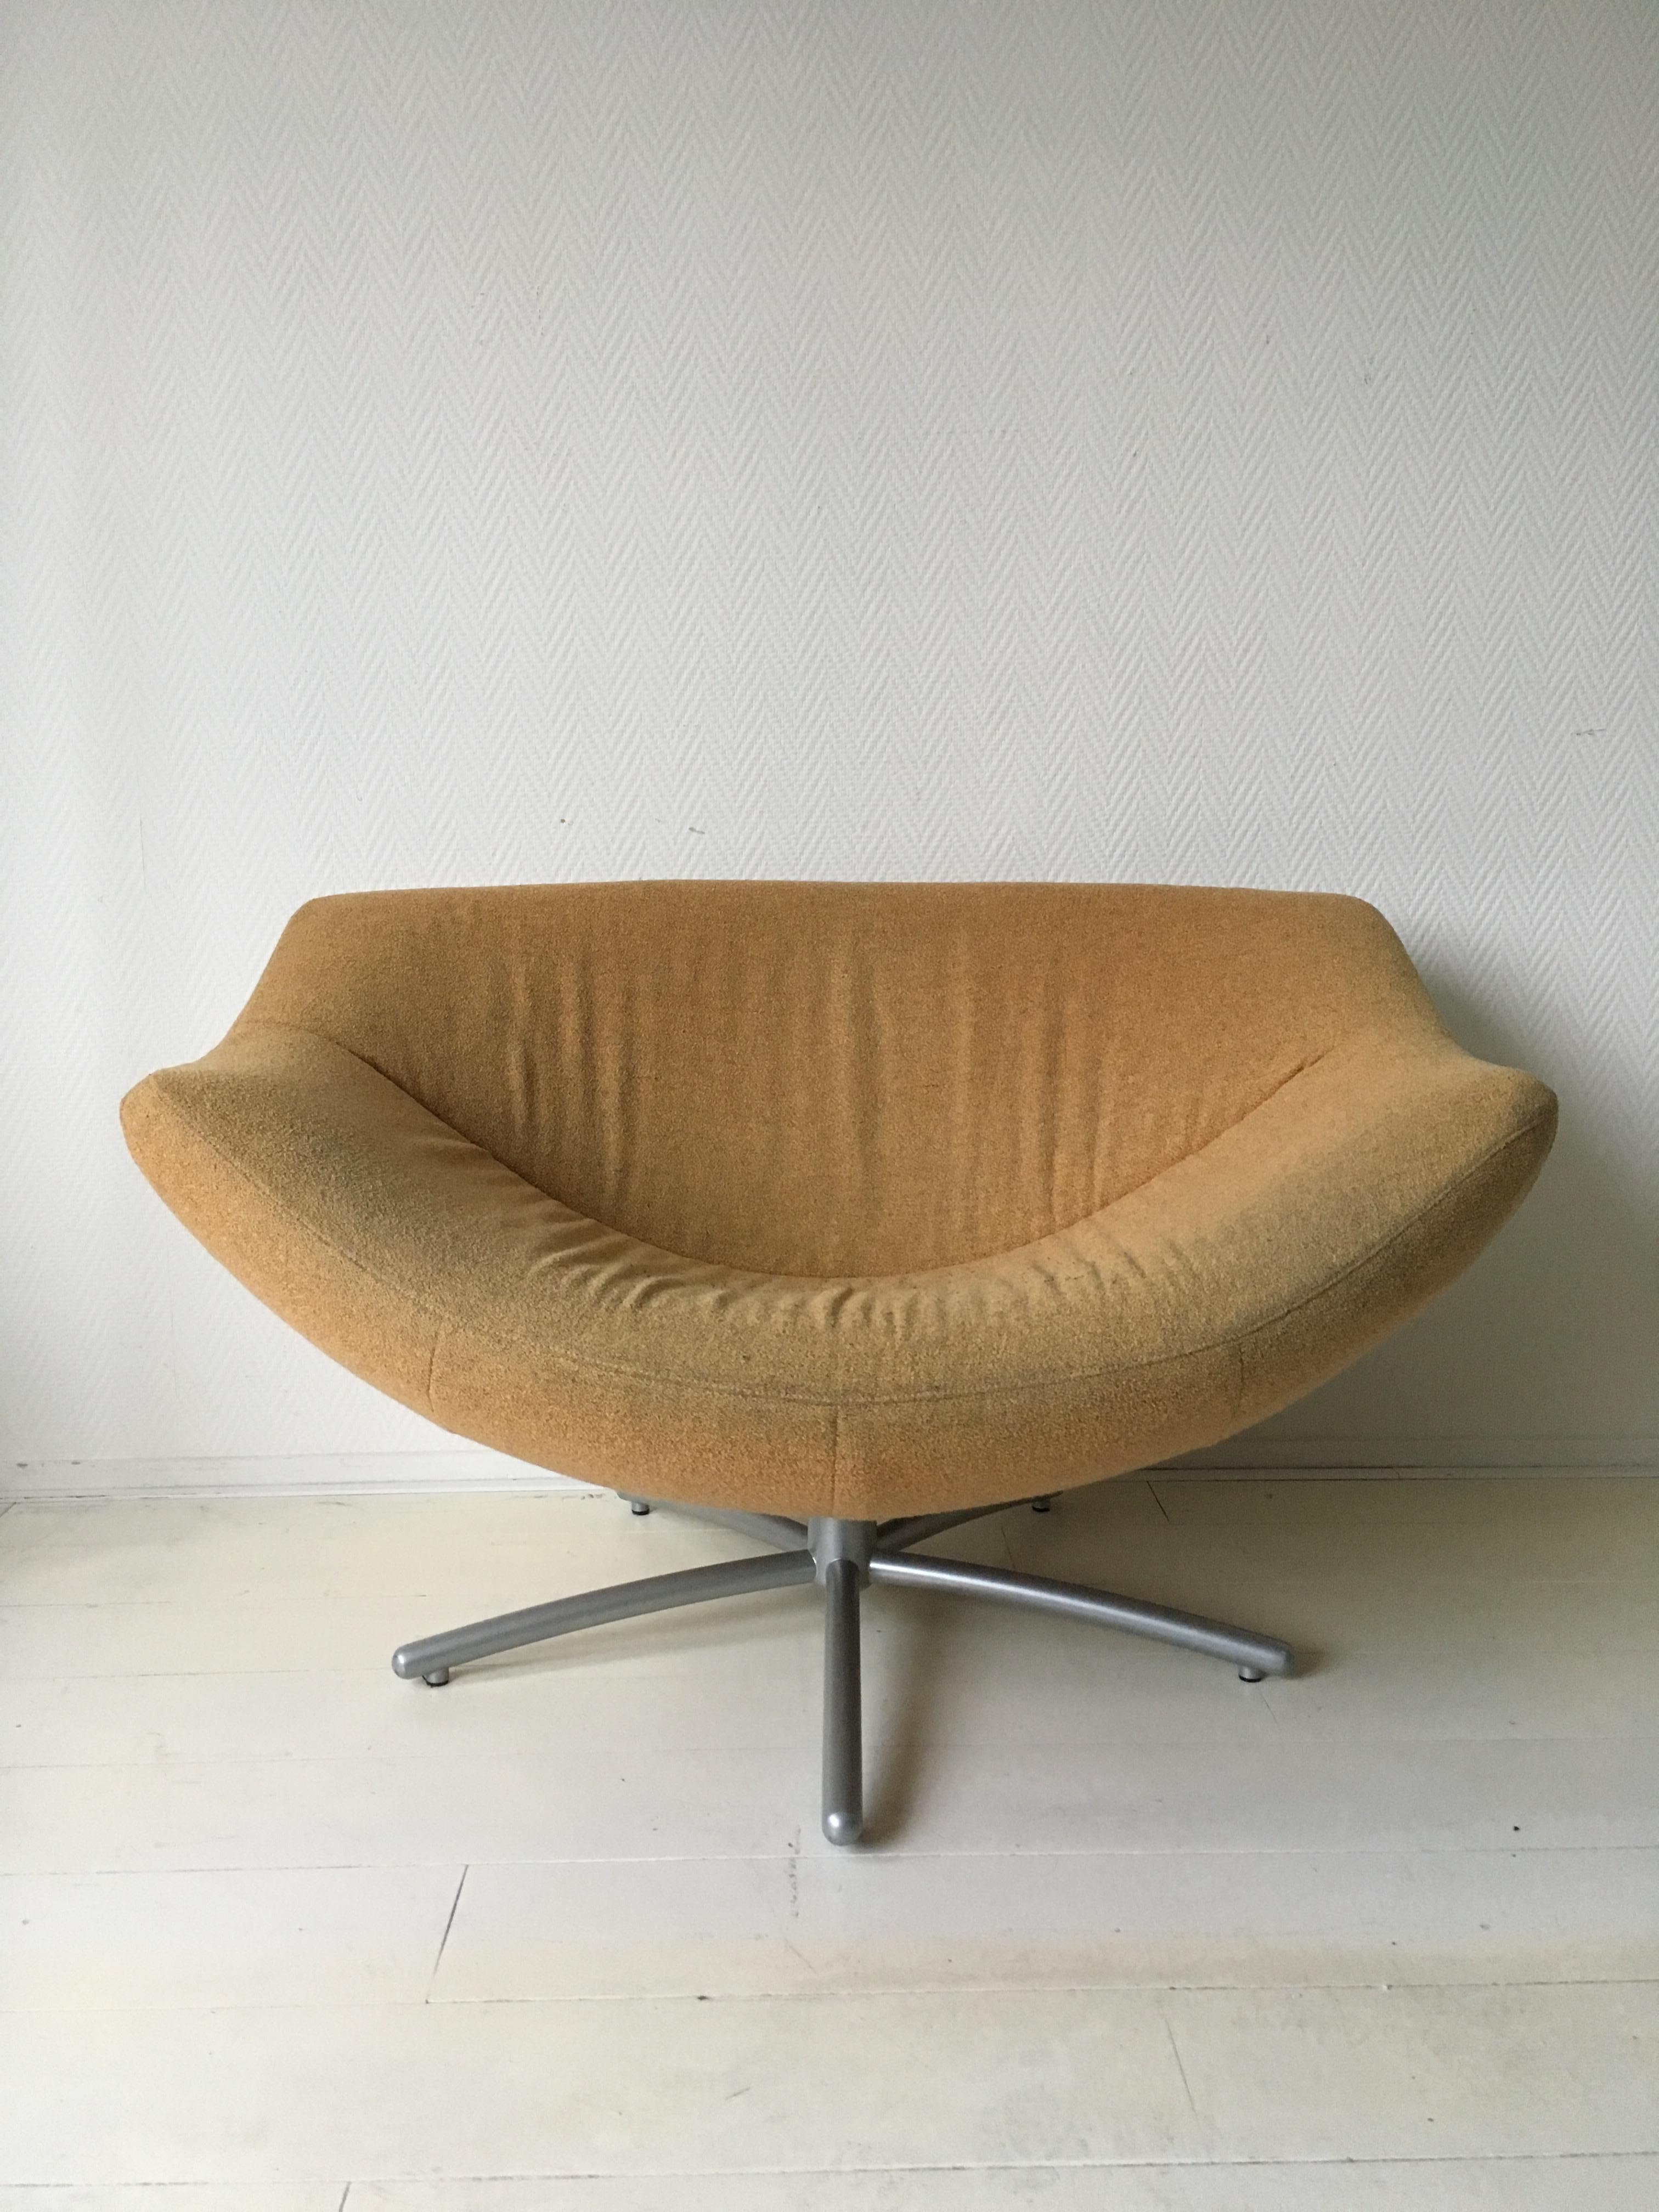 Wonderful swivel chair with yellow/orange replaceable upholstery and a metal base. Remains in good condition with some discoloration to the fabric and minor wear to it’s metal base. The fabric features a zipper. Original signed piece.